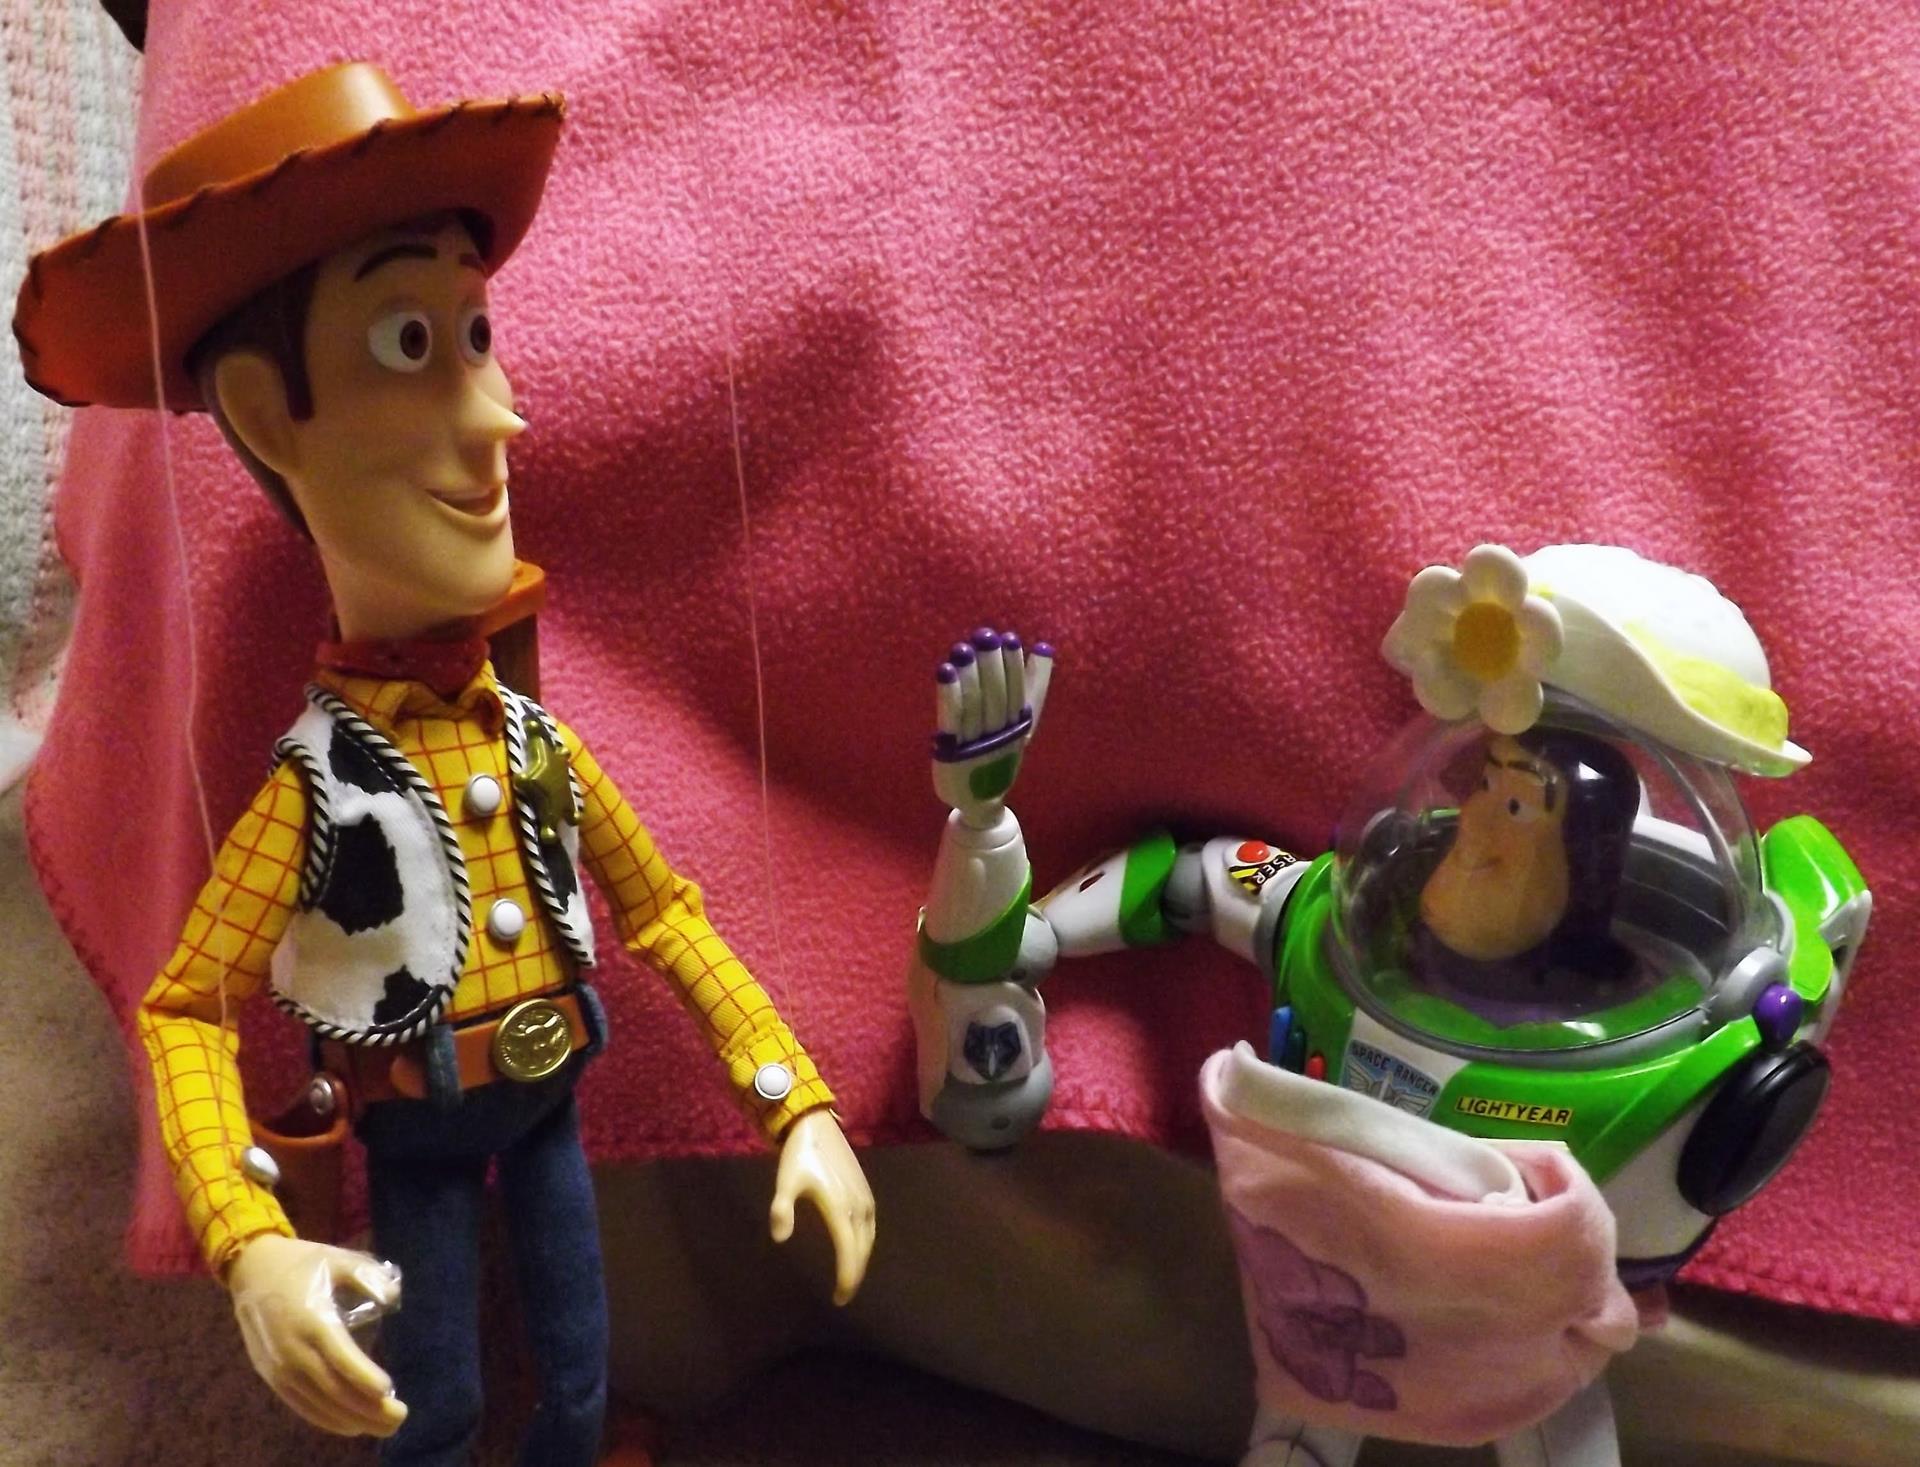 Get awesome Toy Story HD images in each new Chrome tab! 